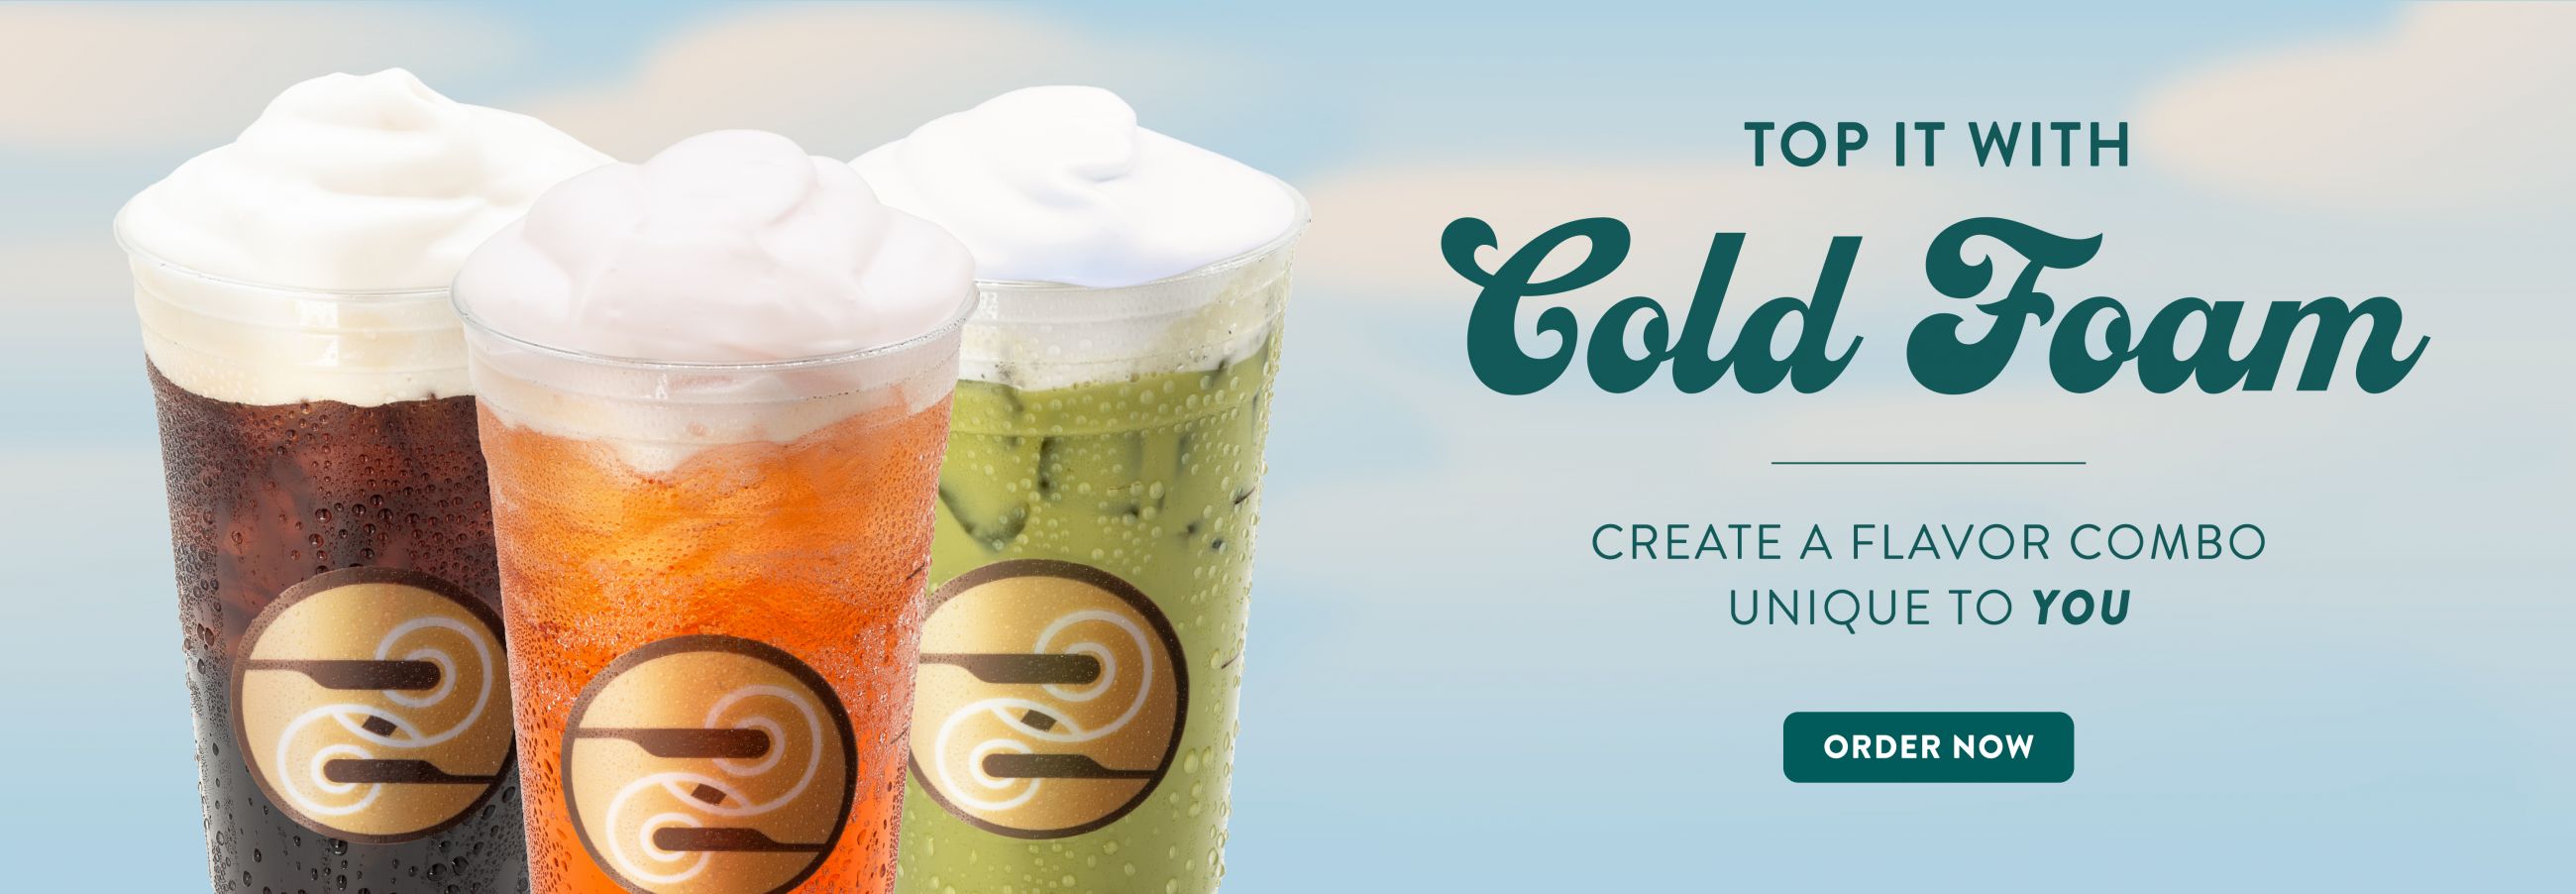 image highlighting the fact you can get custom flavors of cold foam to top your drink